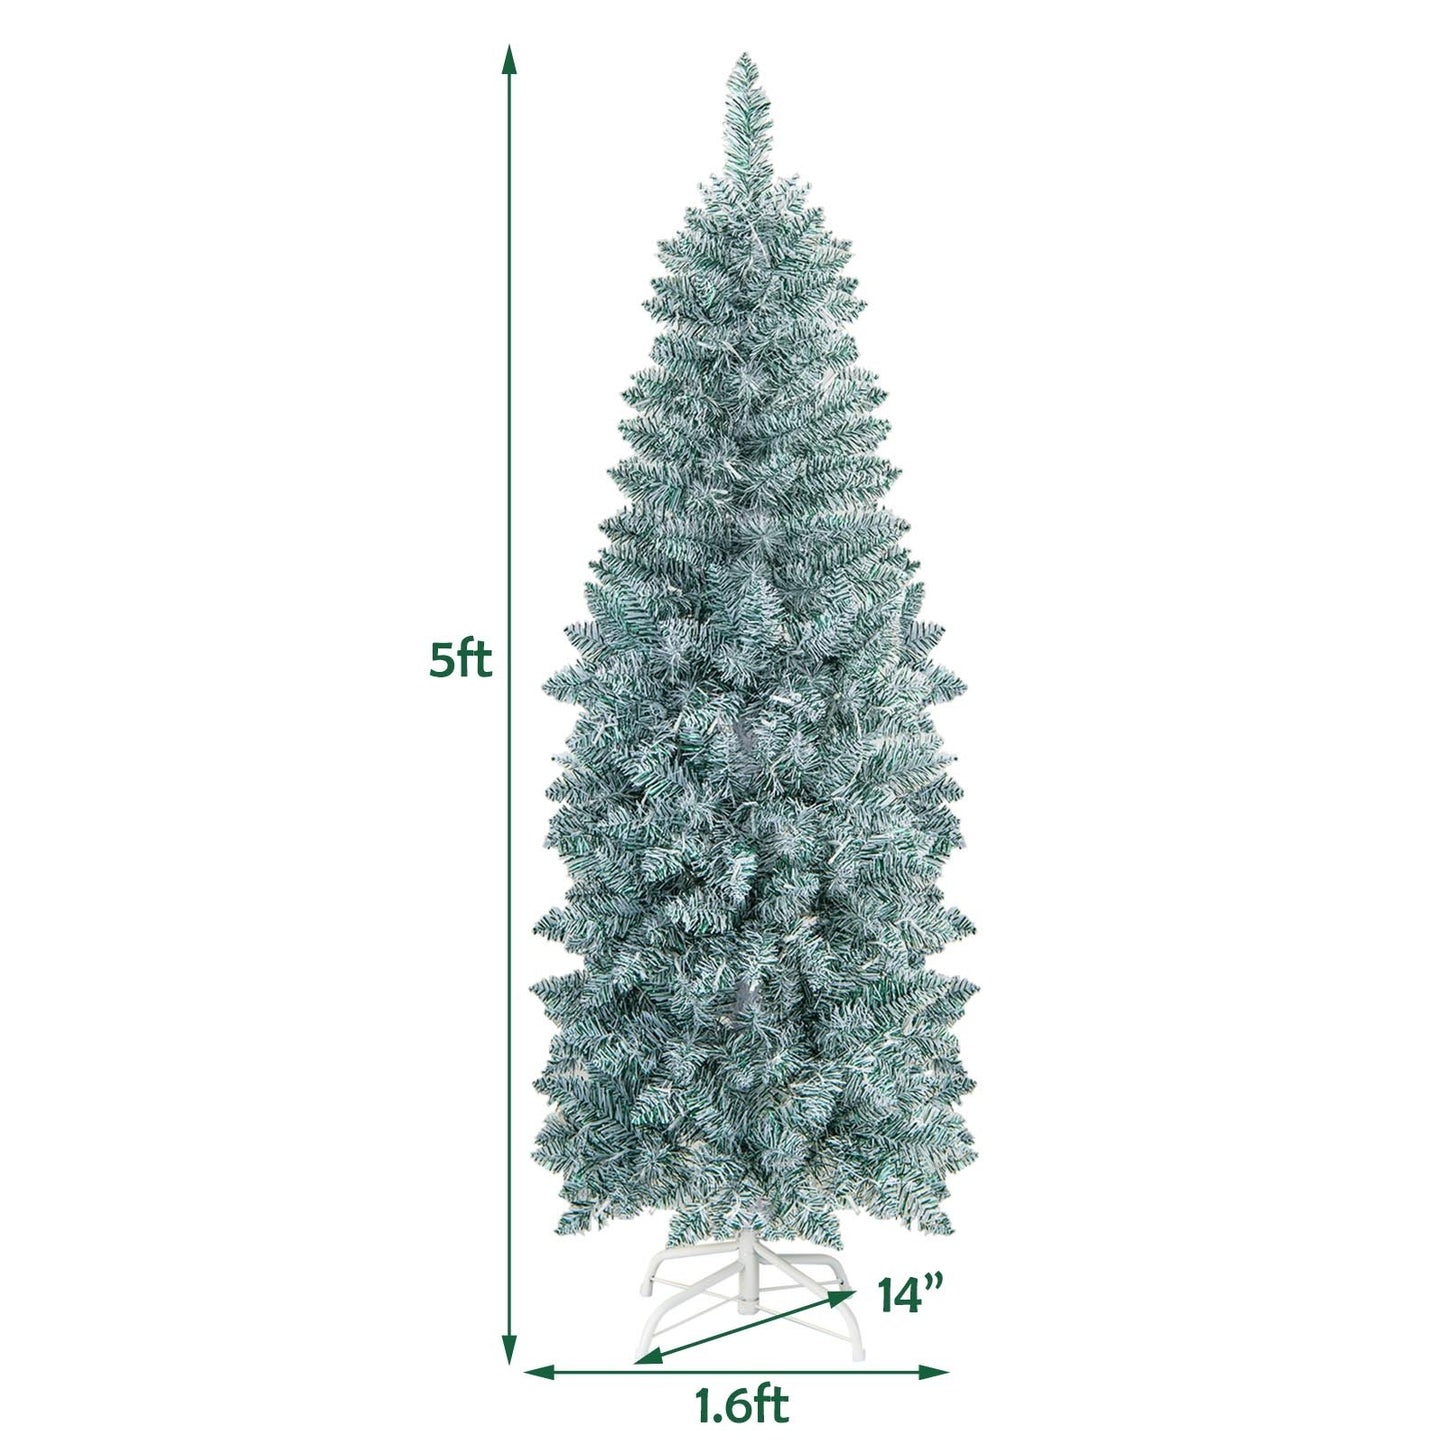 5 FT Pre-lit Artificial Christmas Tree with 343 Branch Tips and Multi-color LED Lights-5 ft, Green